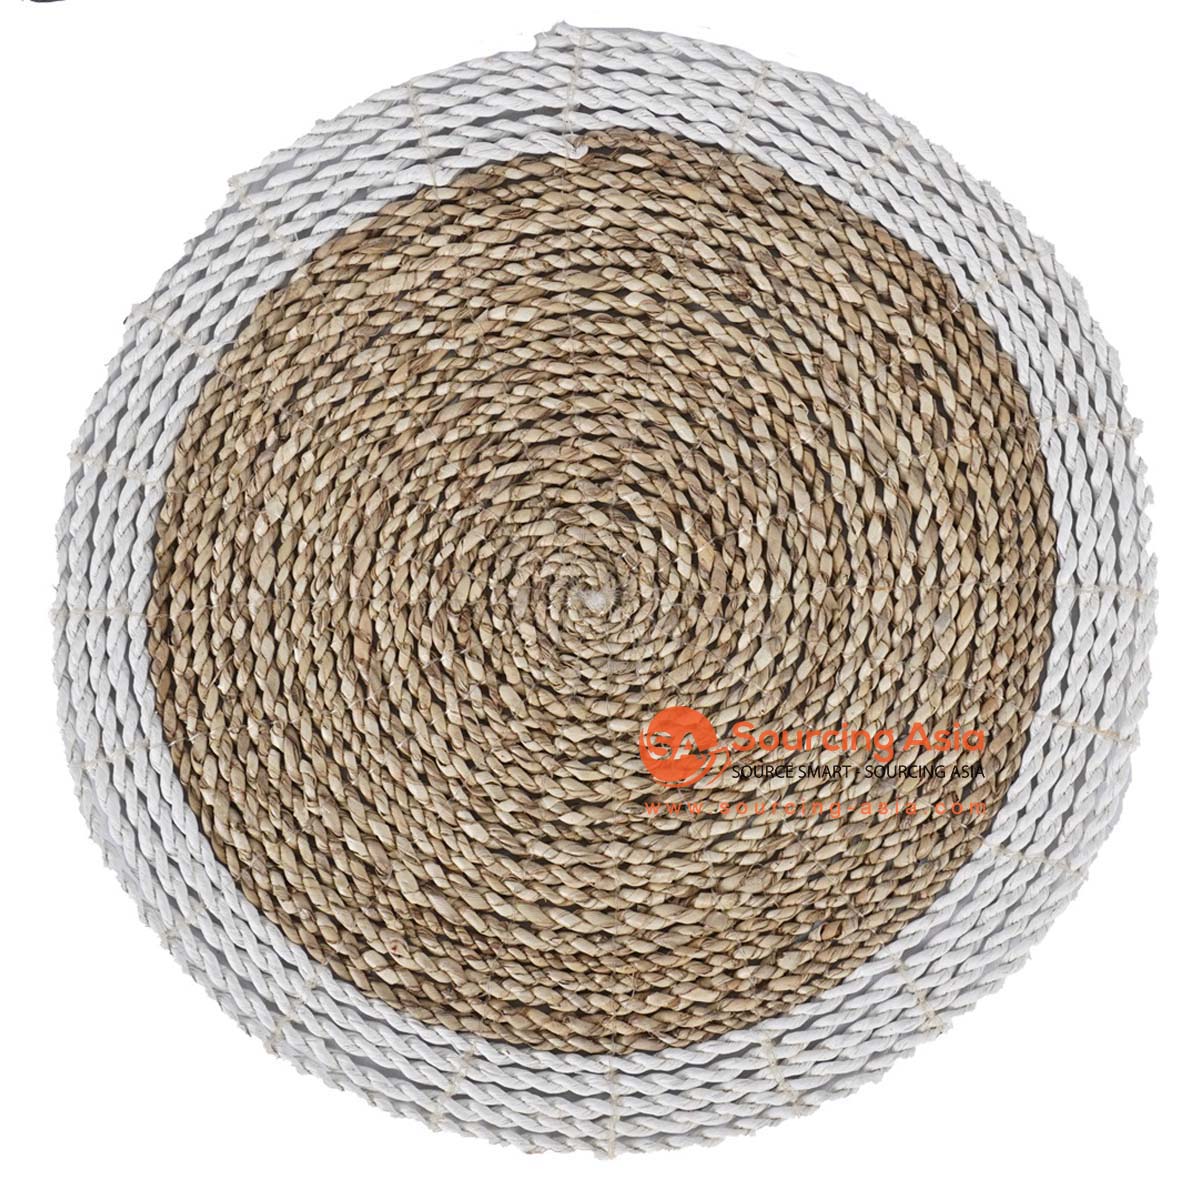 HBSC567-2 NATURAL AND WHITE PANDANUS ROUND PLACEMAT